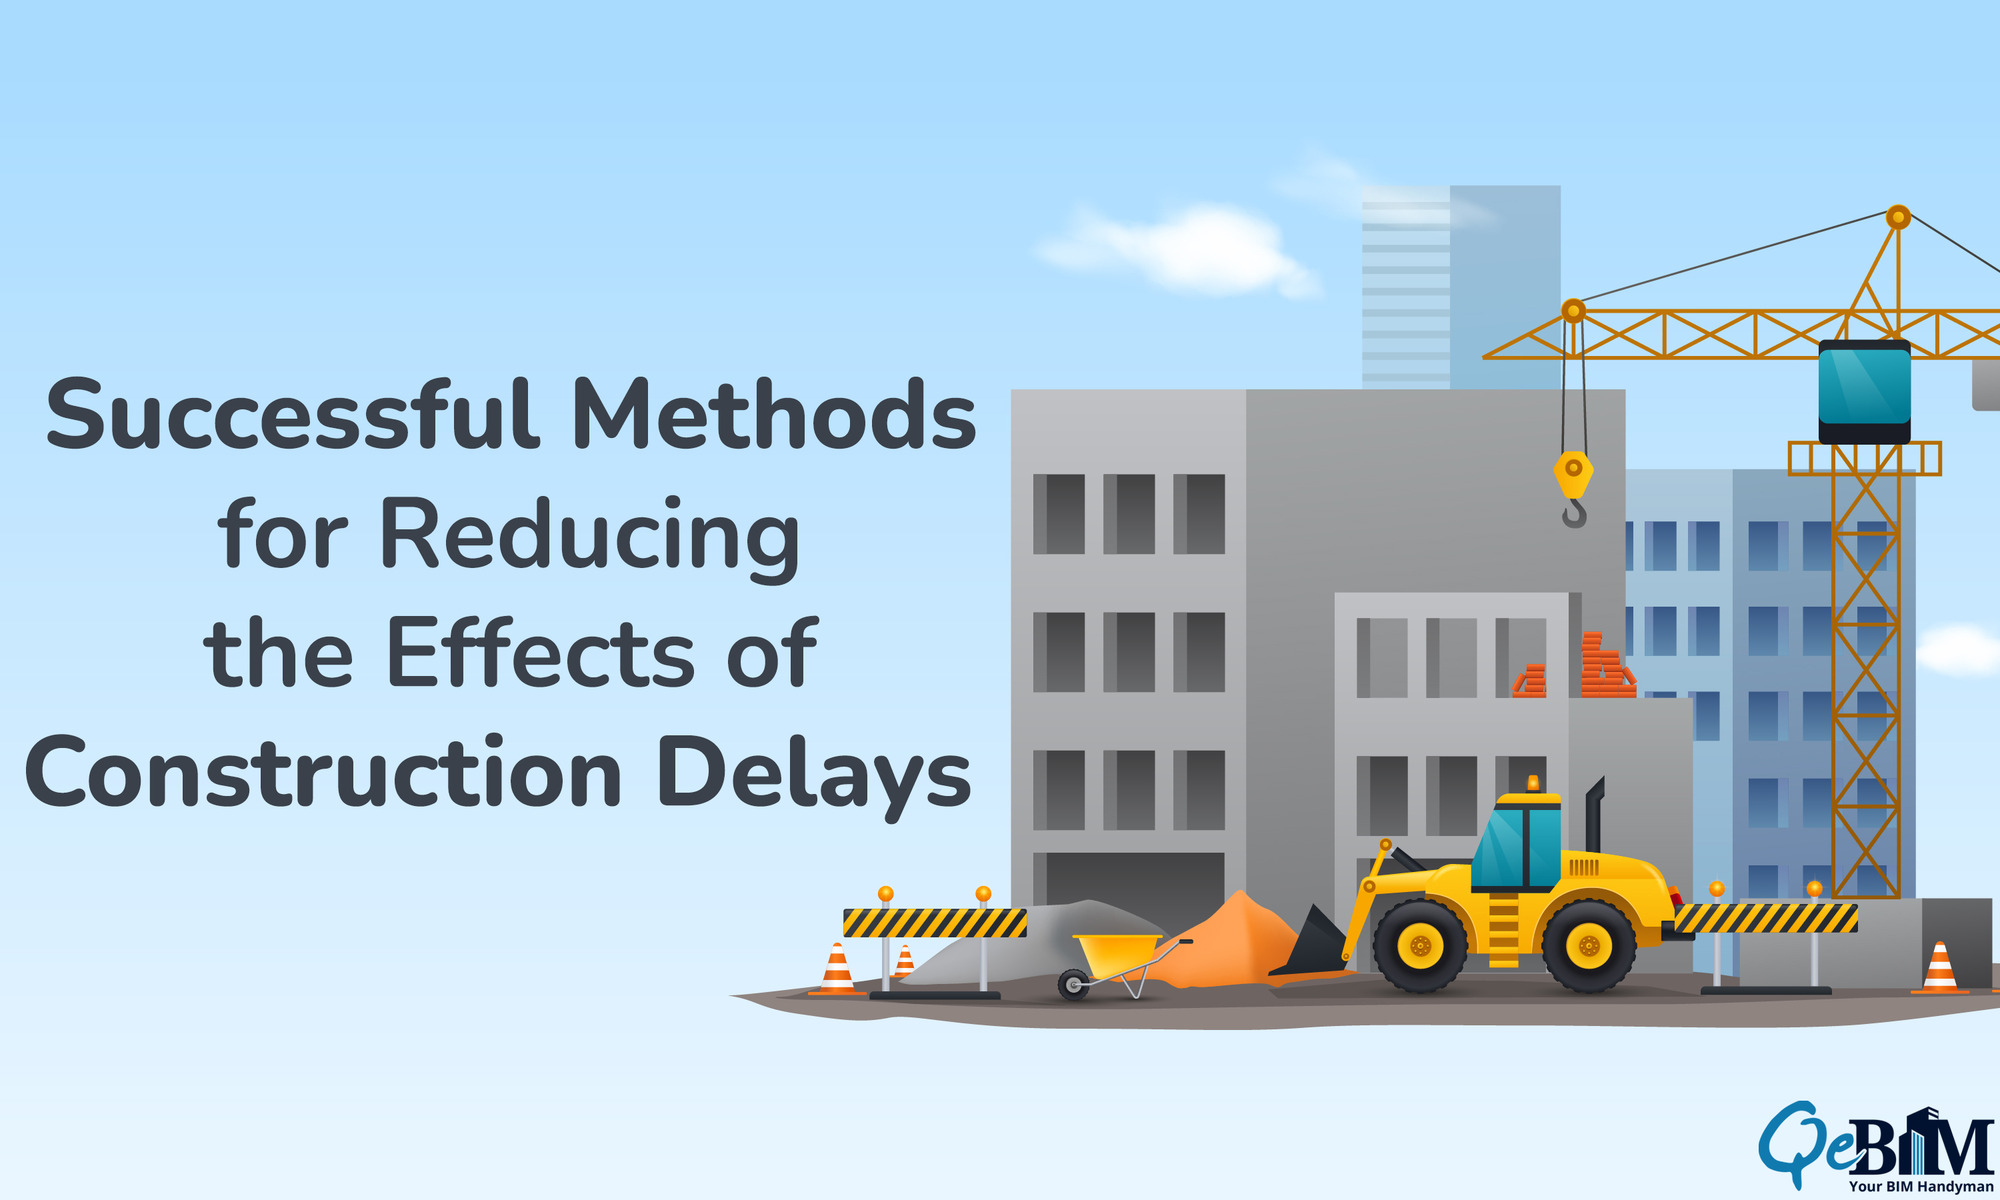 Successful Methods for Reducing the Effects of Construction Delays